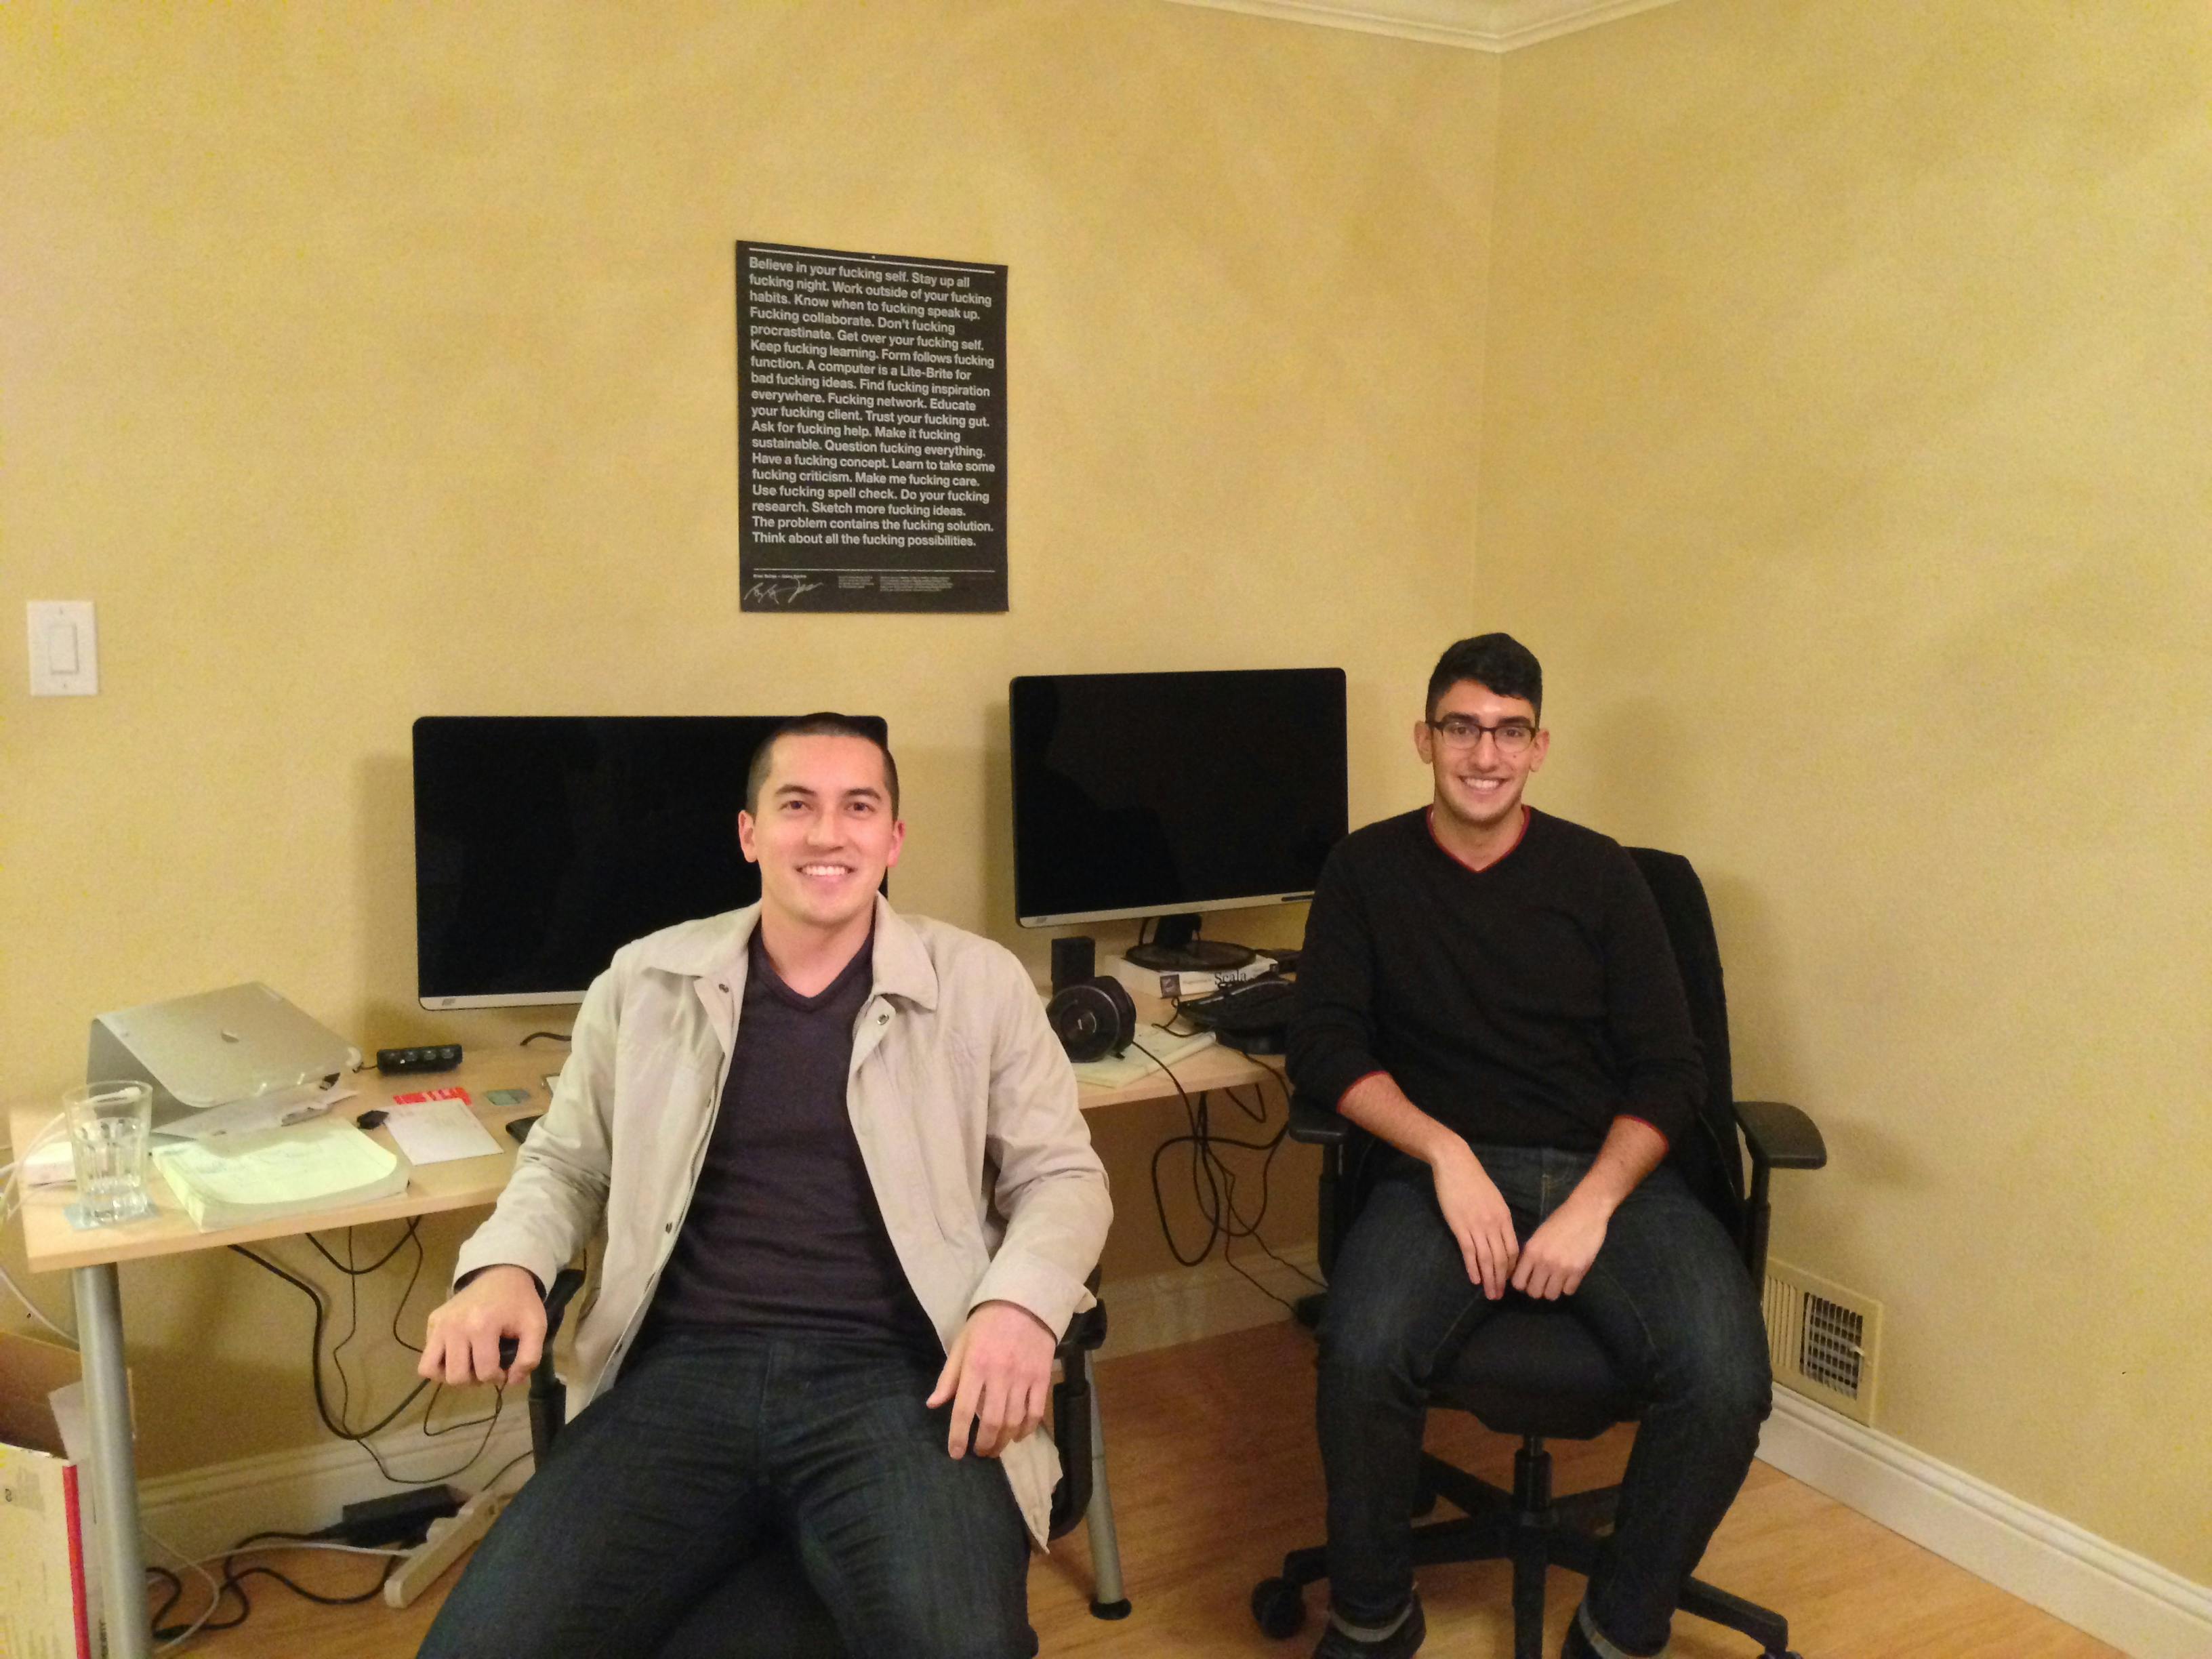 HashiCorp was founded in 2012 by Mitchell Hashimoto and Armon Dadgar. Until 2014, they were the only employees and worked out of the company’s first HQ, Armon’s living room. 